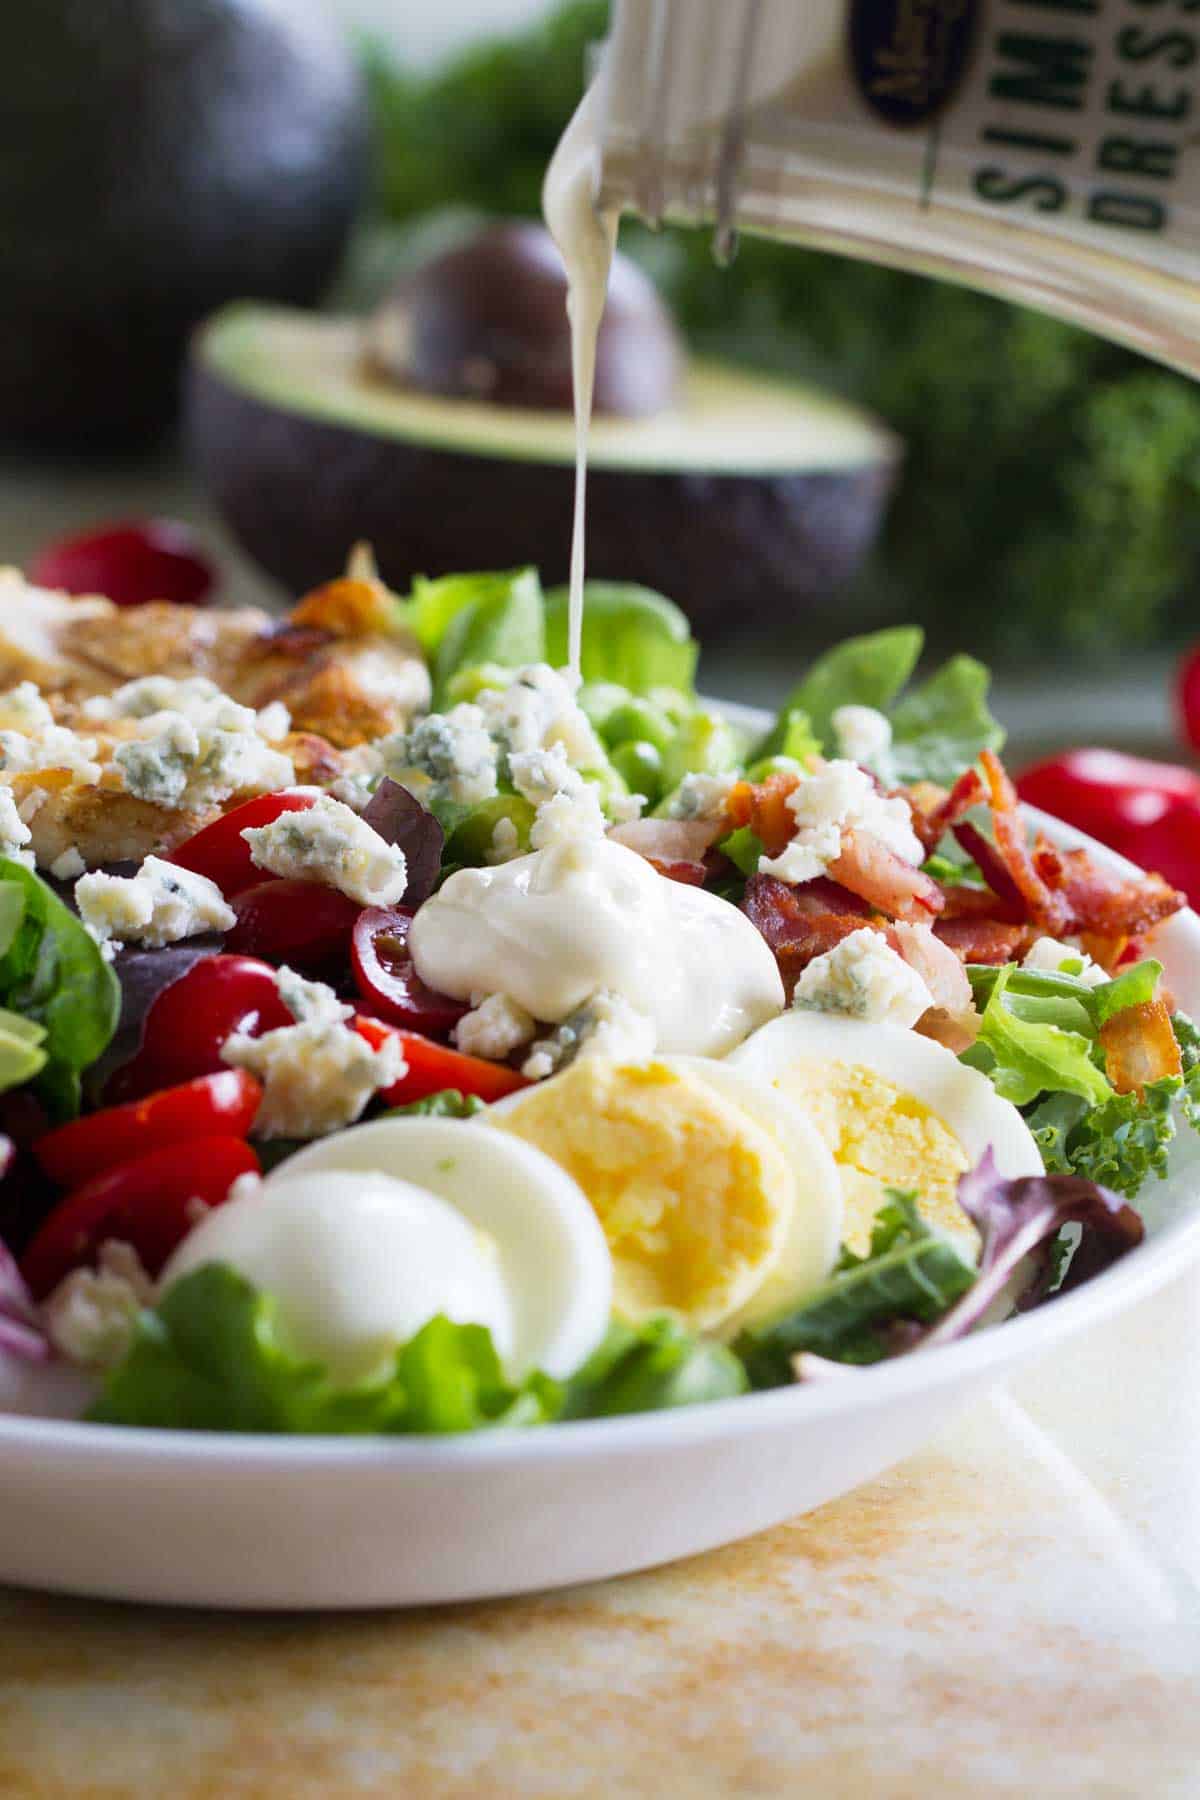 Pouring salad dressing on a Protein Packed Cobb Salad.